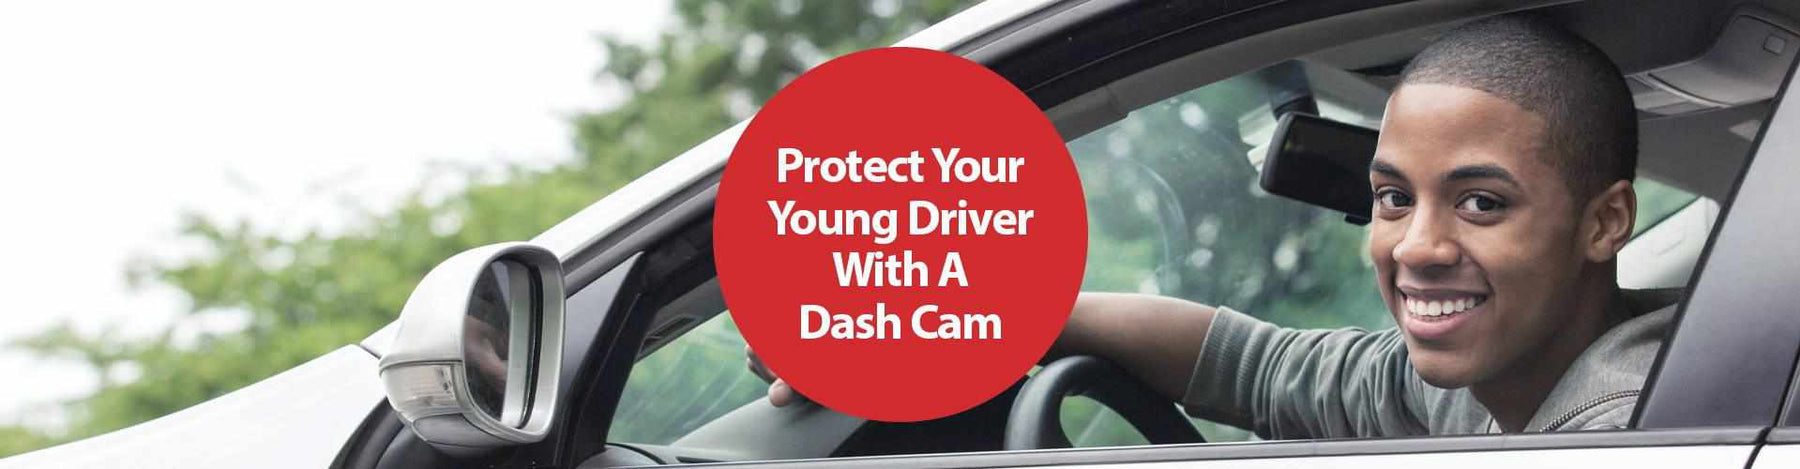 Protect Your Young Driver With A Dash Cam -  - BlackboxMyCar Canada